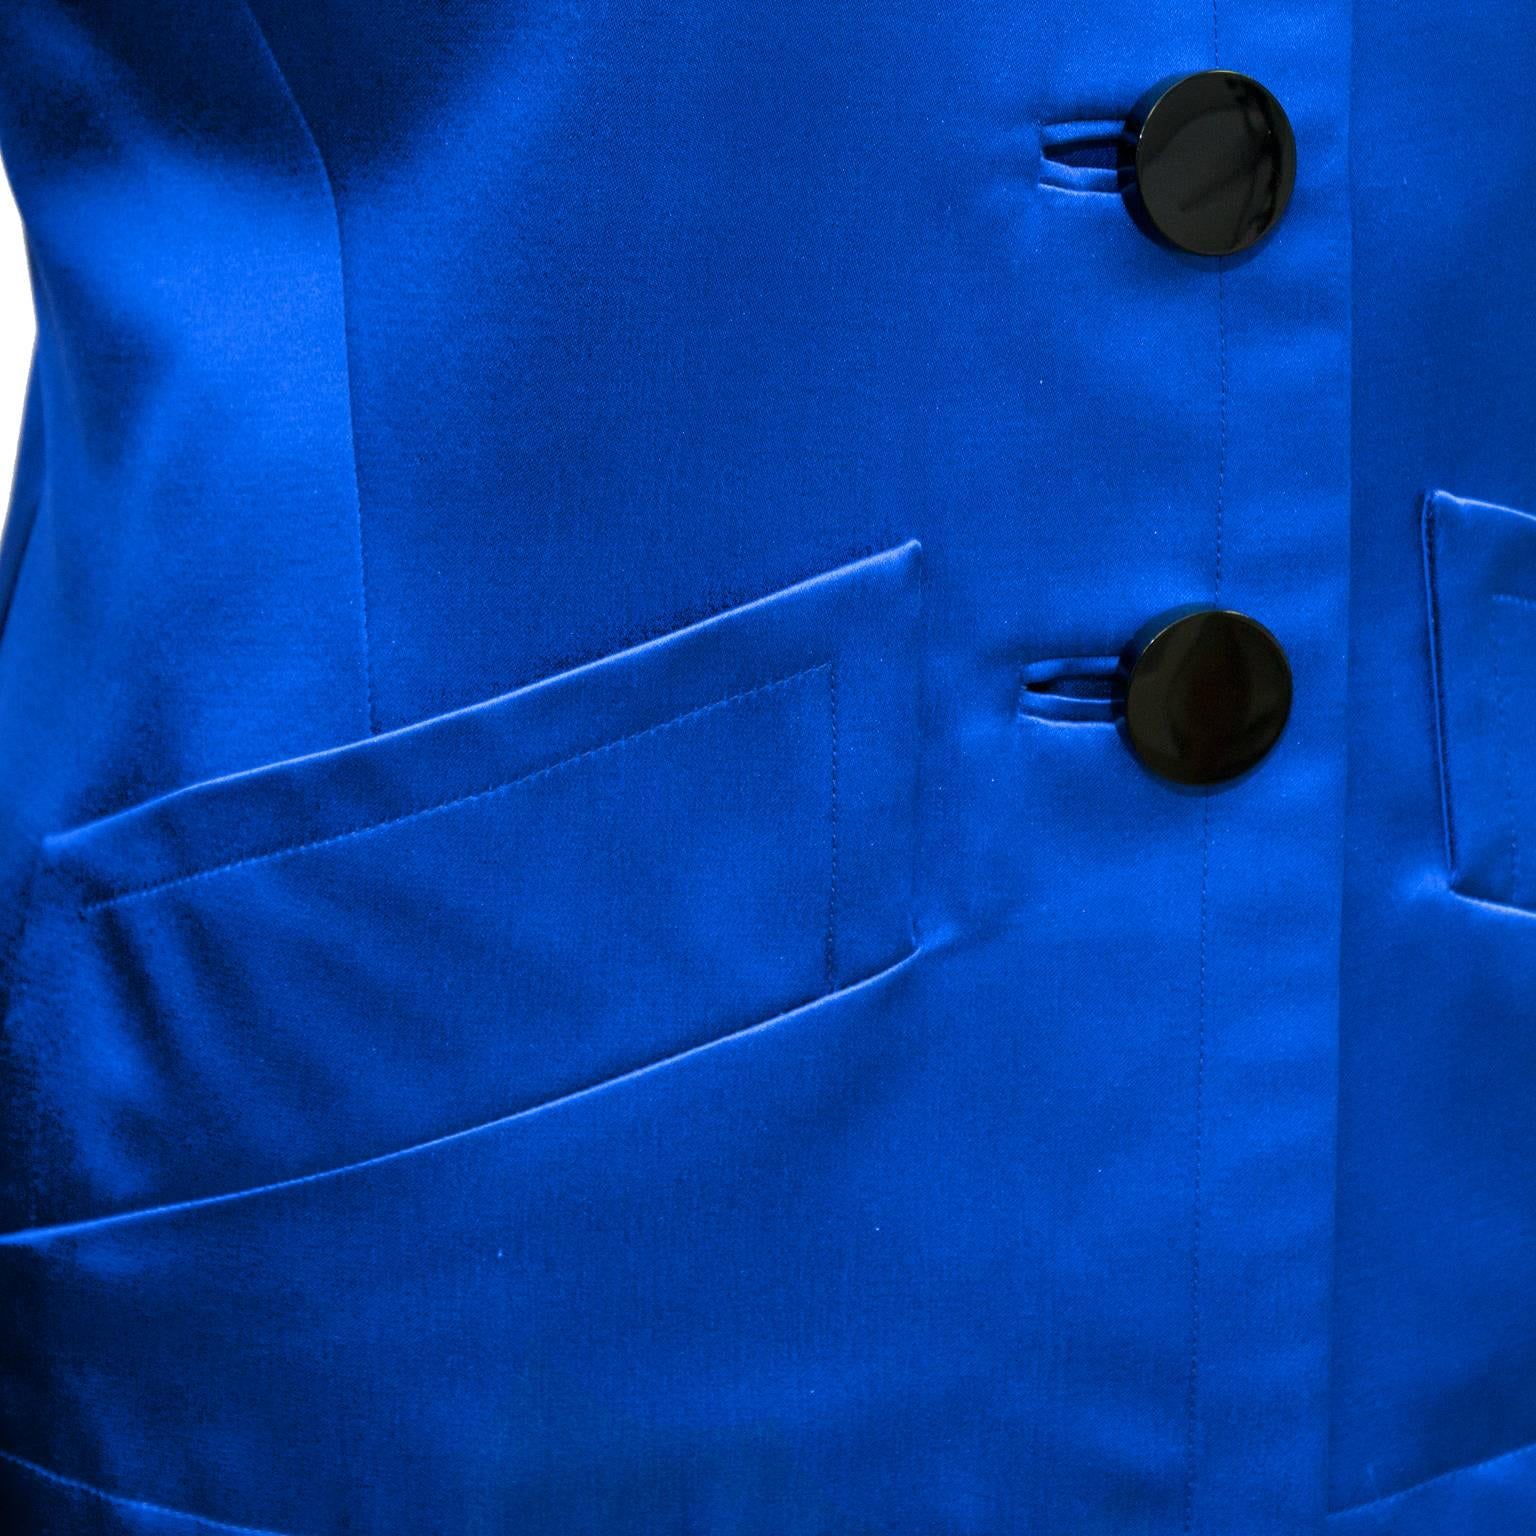 1980's Yves Saint Laurent/YSL Shades of Blue Skirt Suit In Excellent Condition For Sale In Toronto, Ontario